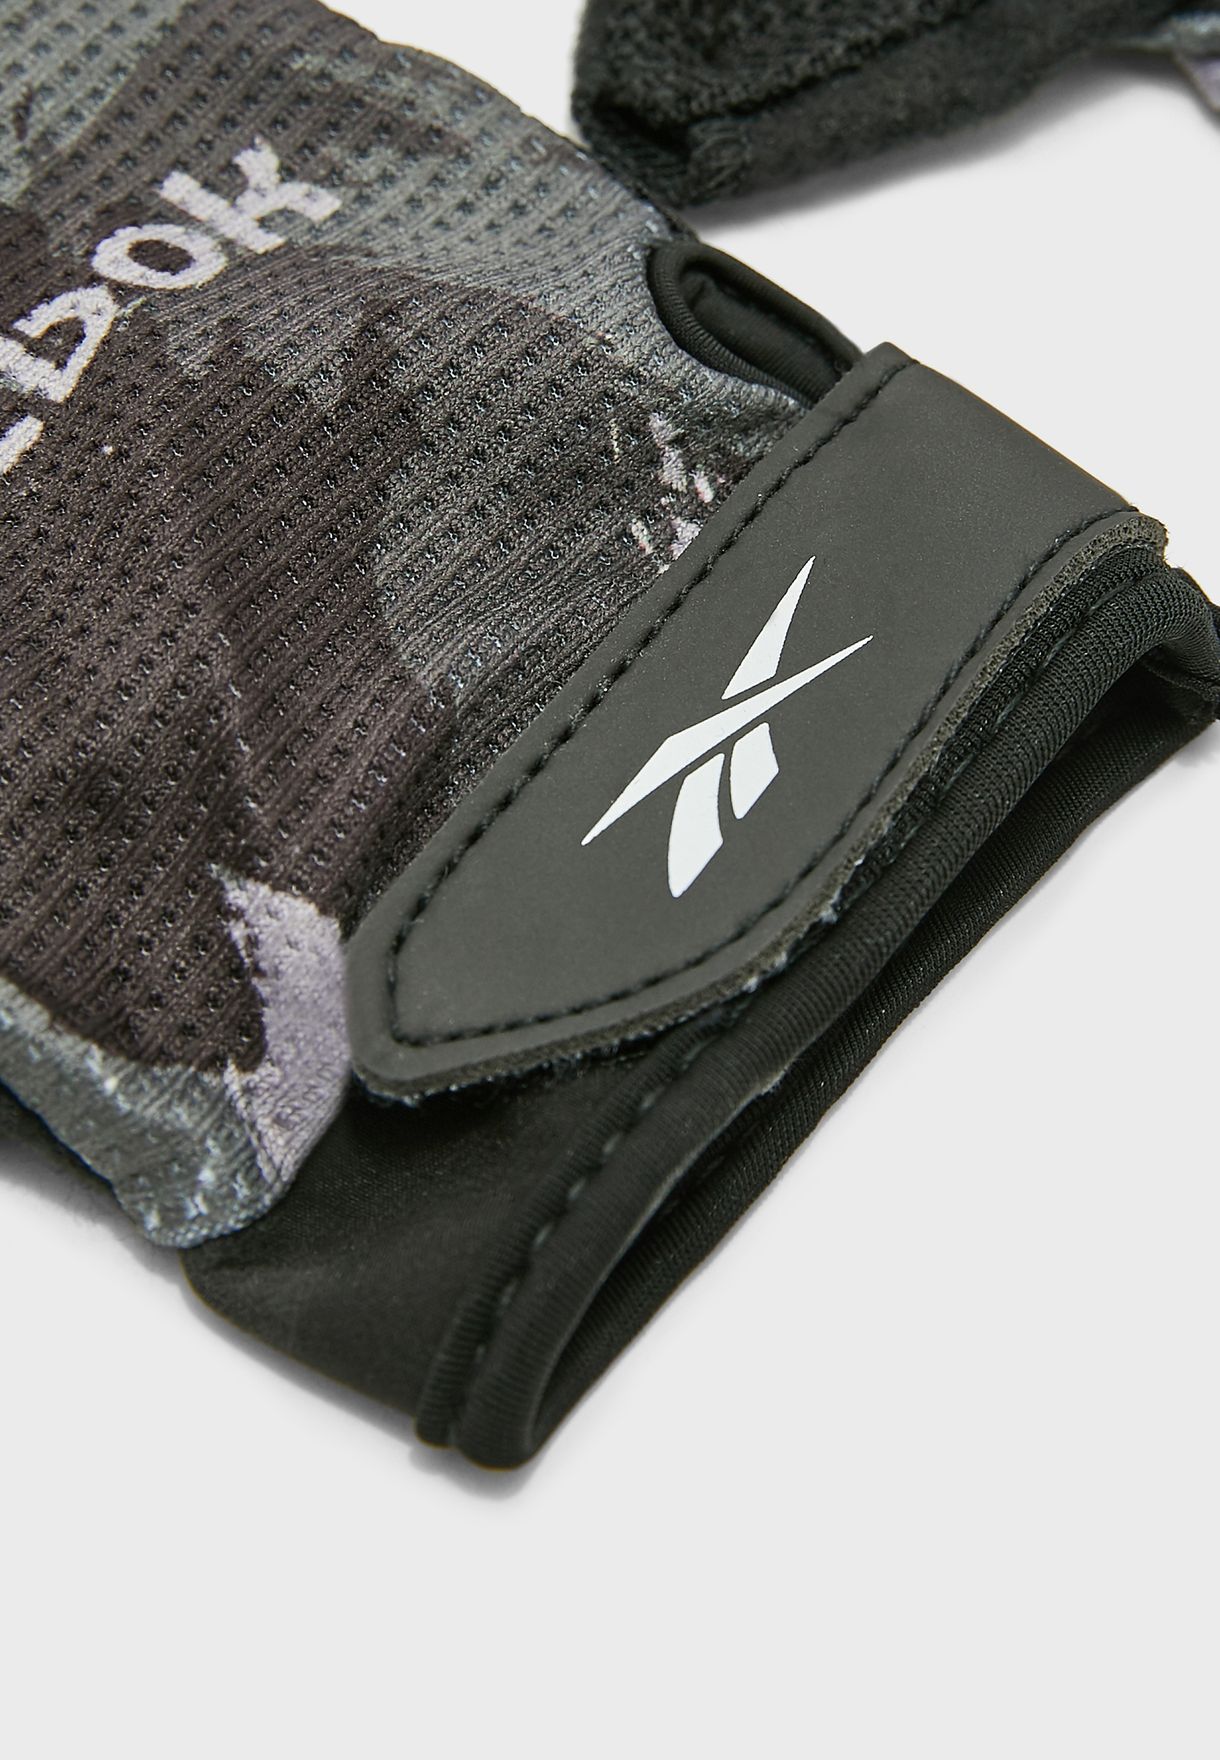 Essential Fitness Gloves